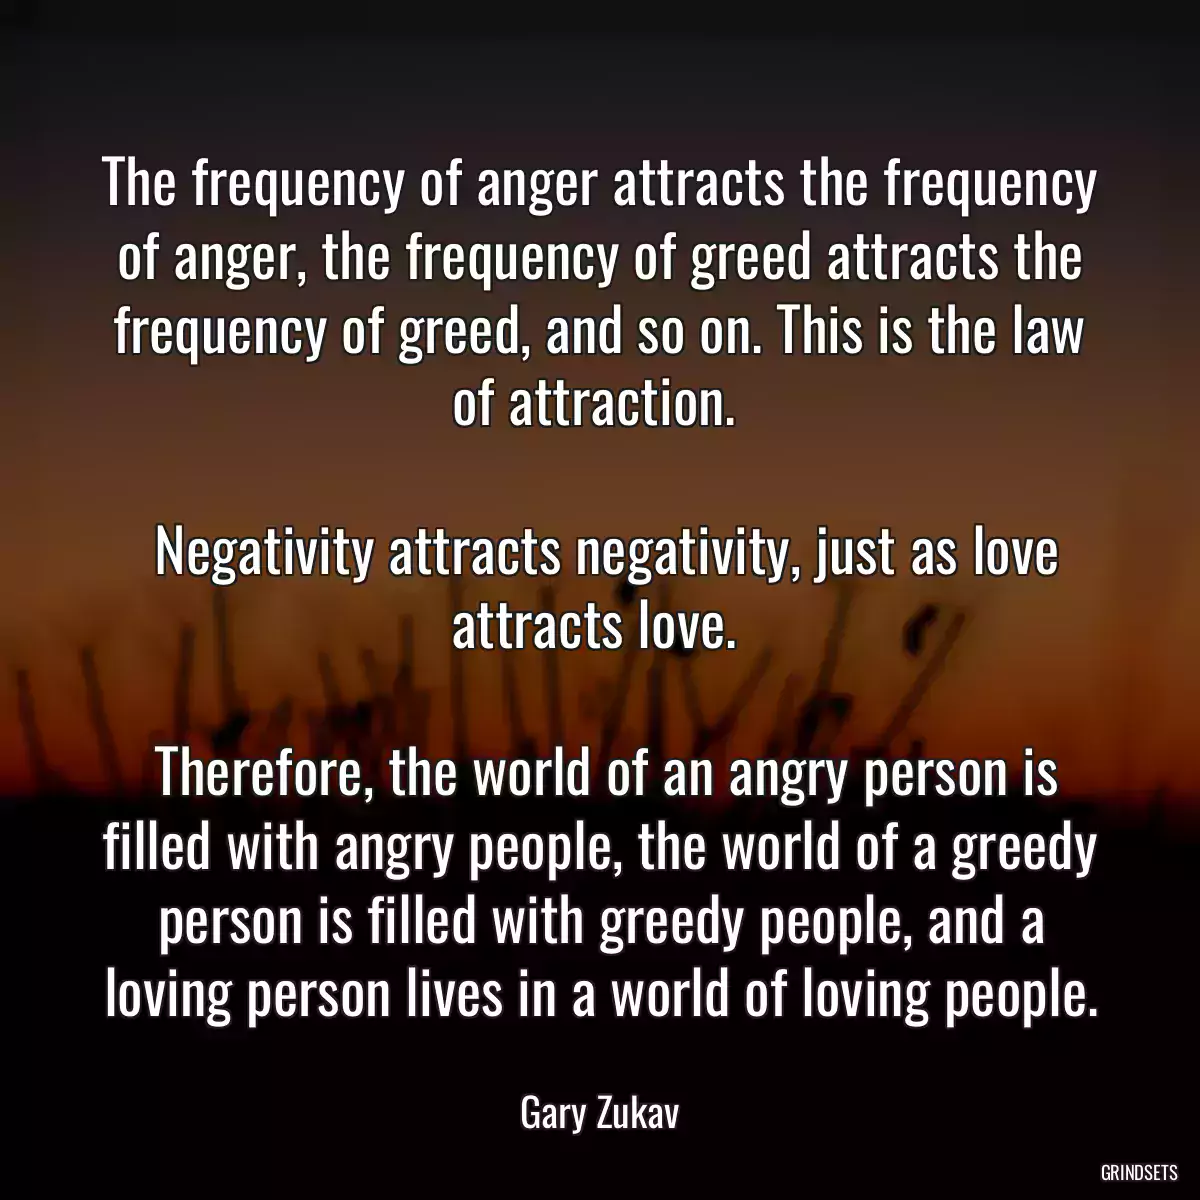 The frequency of anger attracts the frequency of anger, the frequency of greed attracts the frequency of greed, and so on. This is the law of attraction. 
 
 Negativity attracts negativity, just as love attracts love. 
 
 Therefore, the world of an angry person is filled with angry people, the world of a greedy person is filled with greedy people, and a loving person lives in a world of loving people.